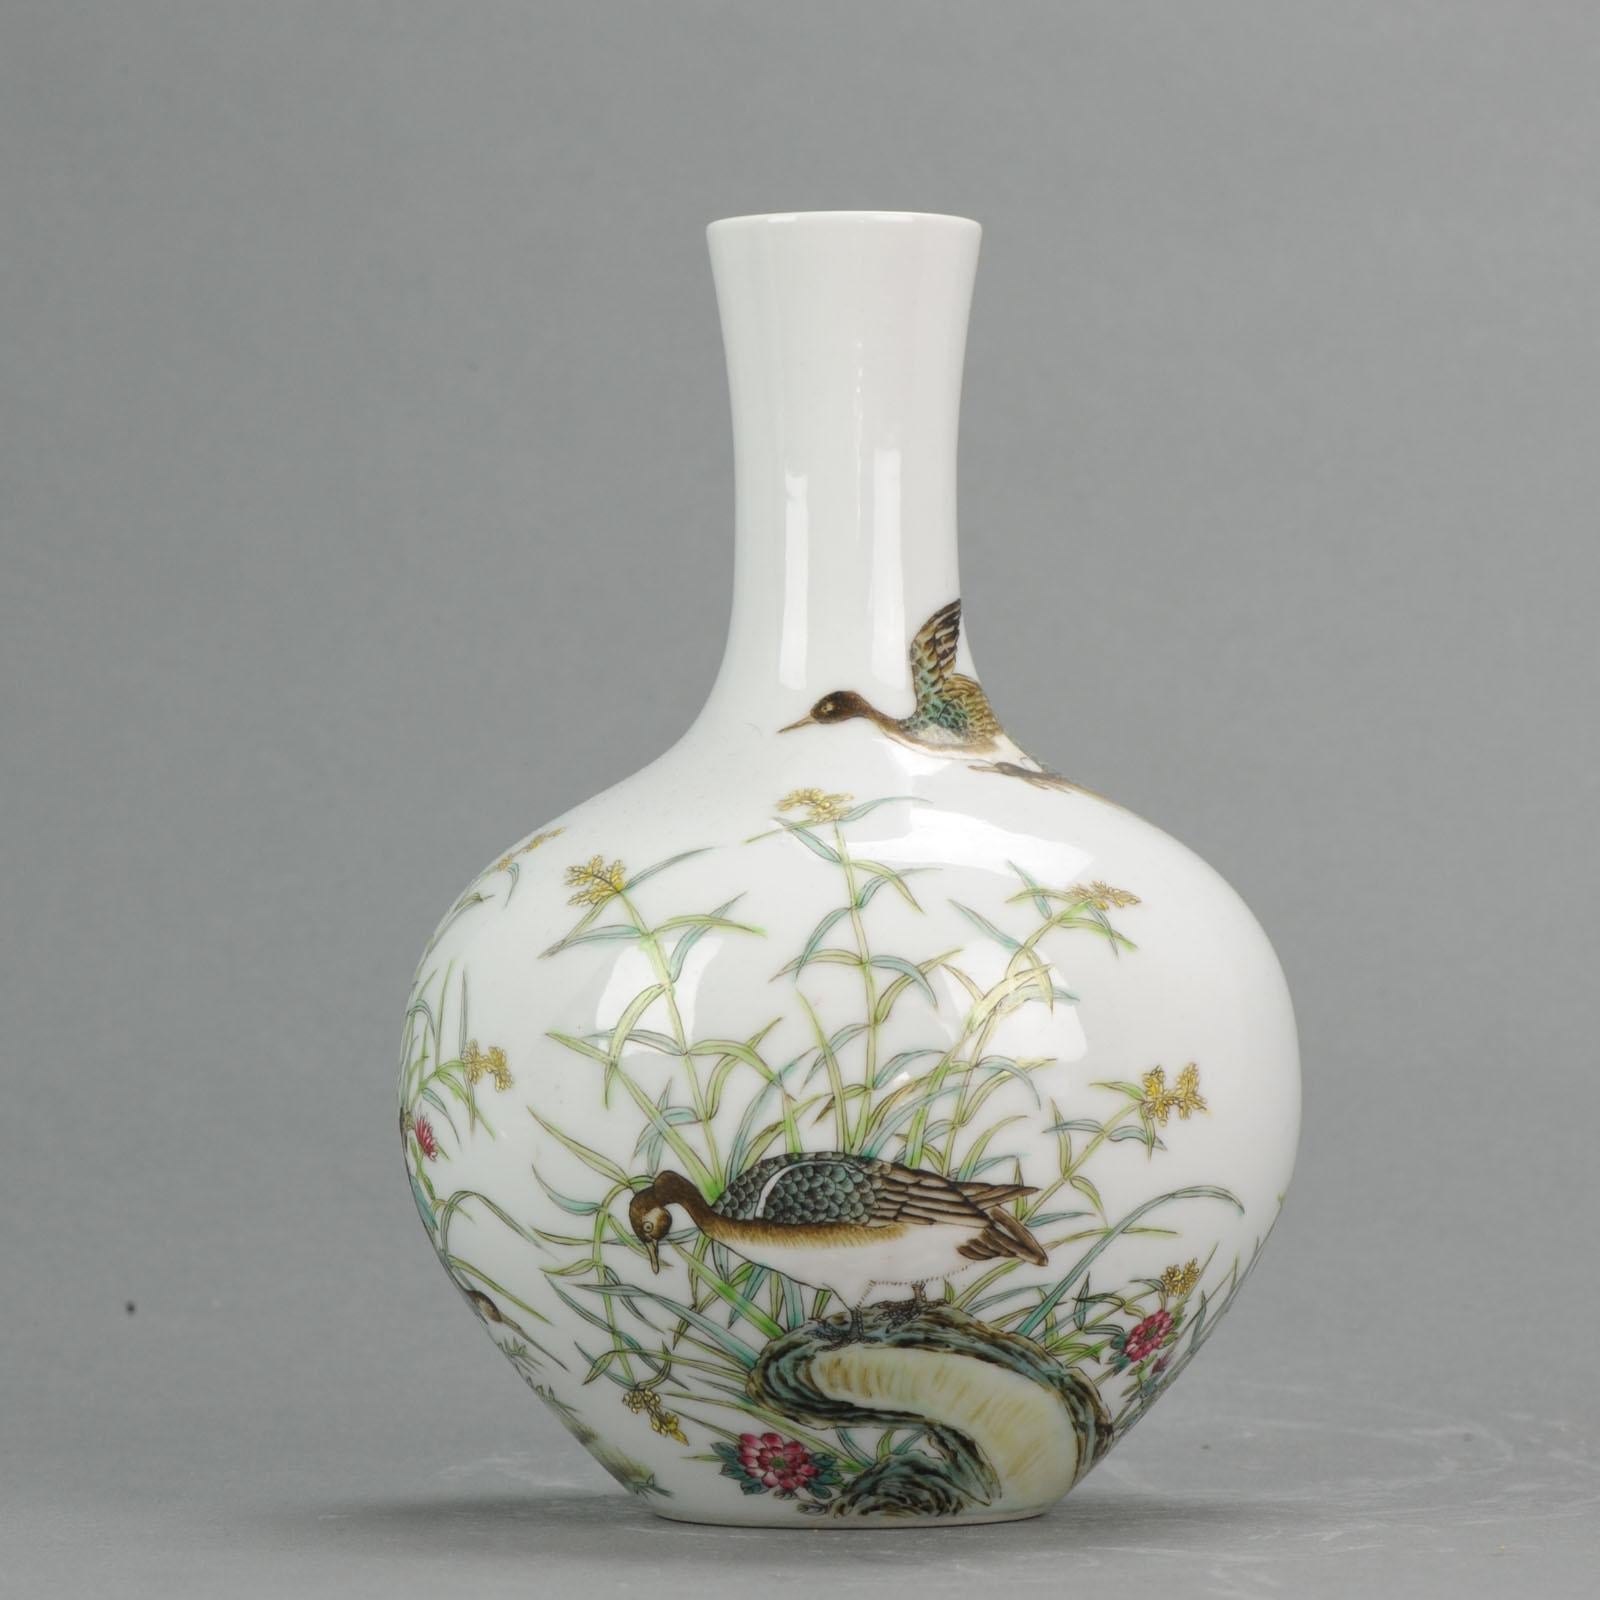 A very nice vase with a stunning decoration. In our opinion it is a fairly recent production, but of fabulous quality.

Yongzheng marked.

Bought in Hong Kong in 1992

Condition
Overall condition perfect. Size: 188mm height

Period
20th